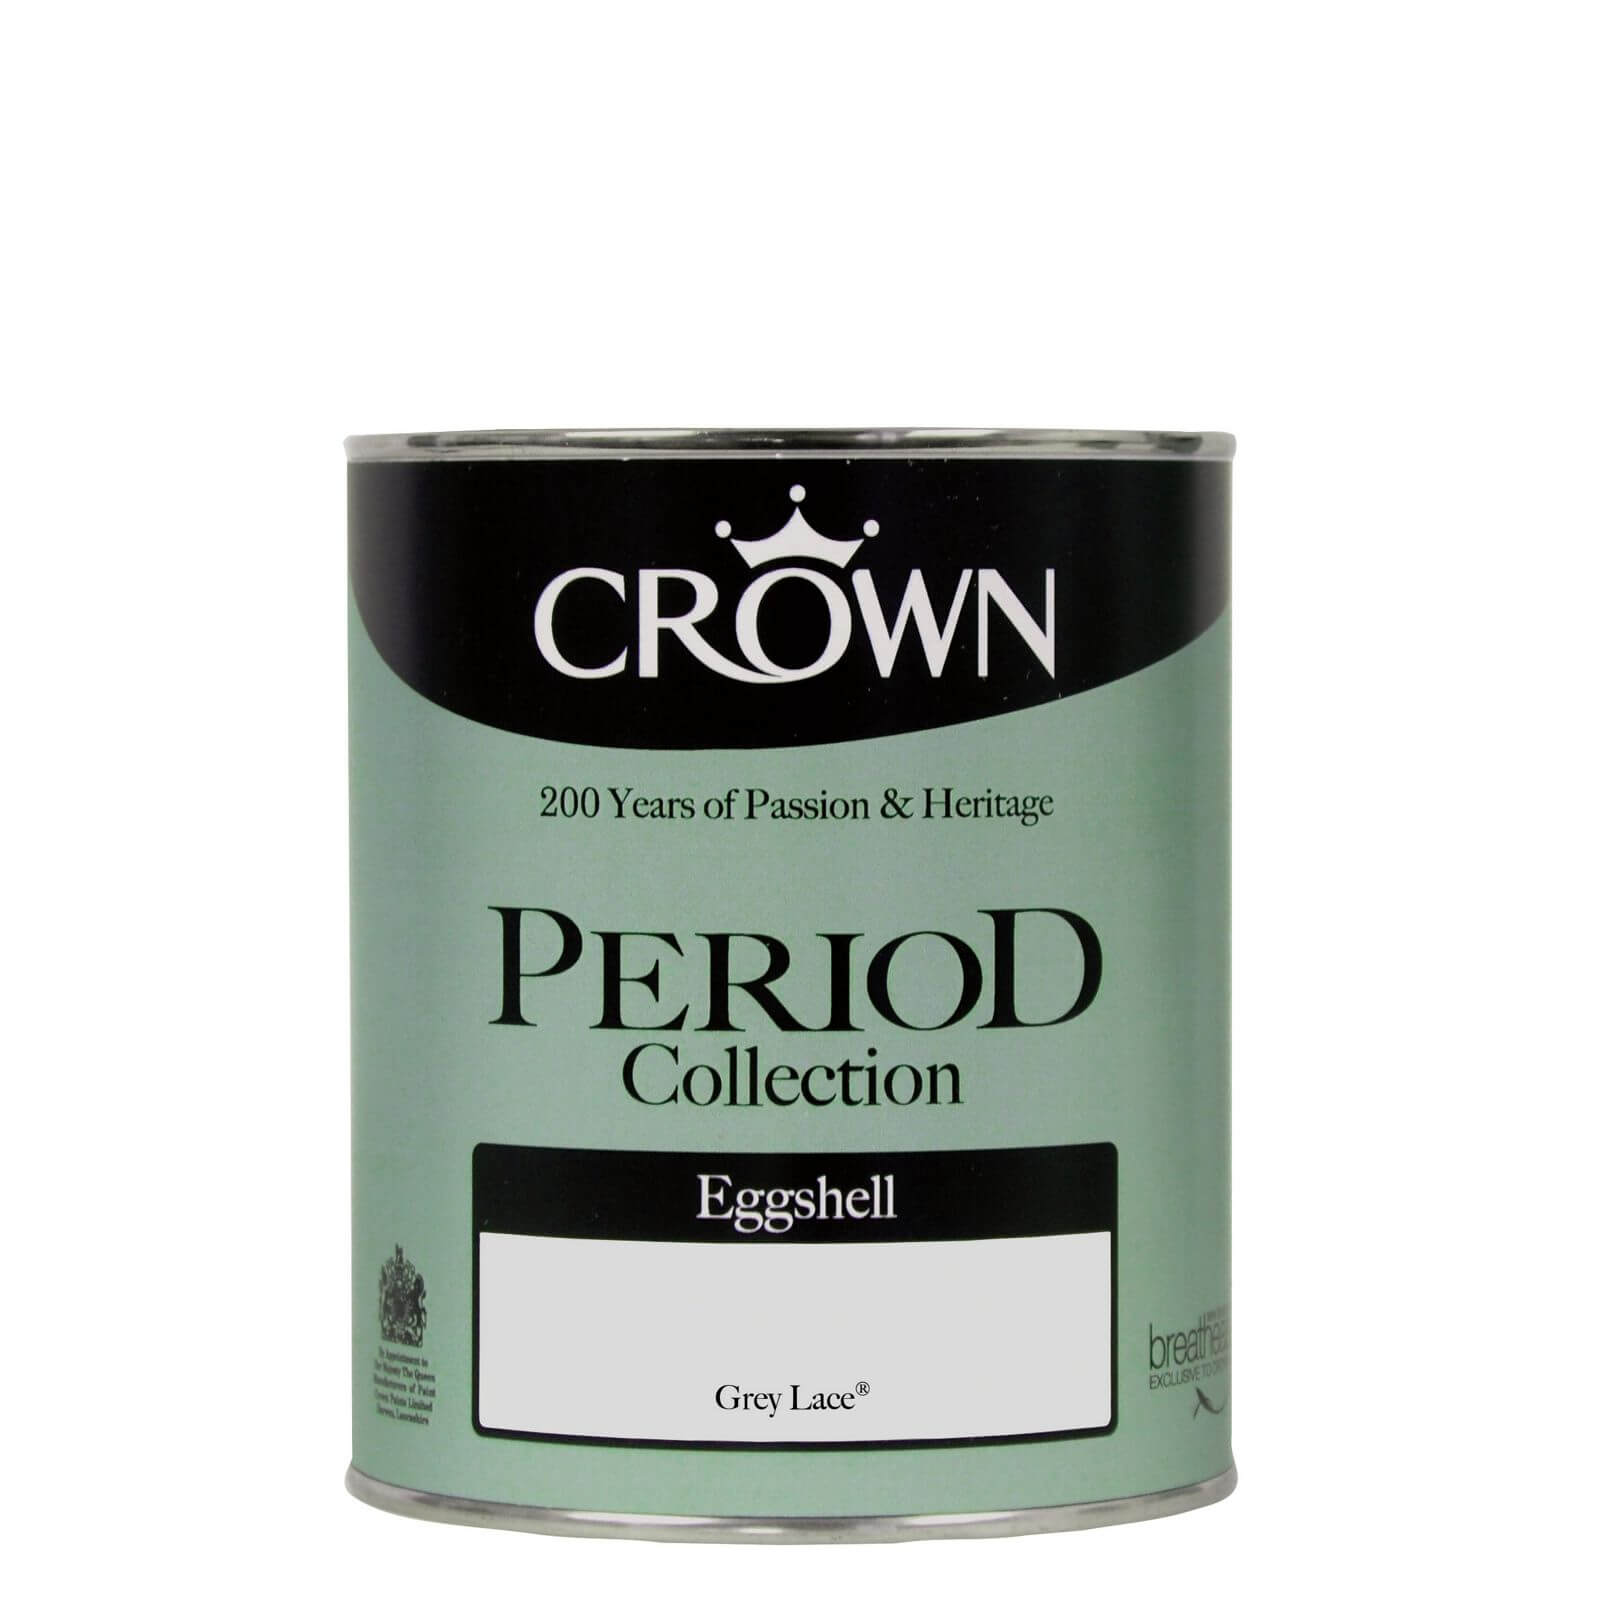 Crown Period Collection Grey Lace - Eggshell Paint - 750ml